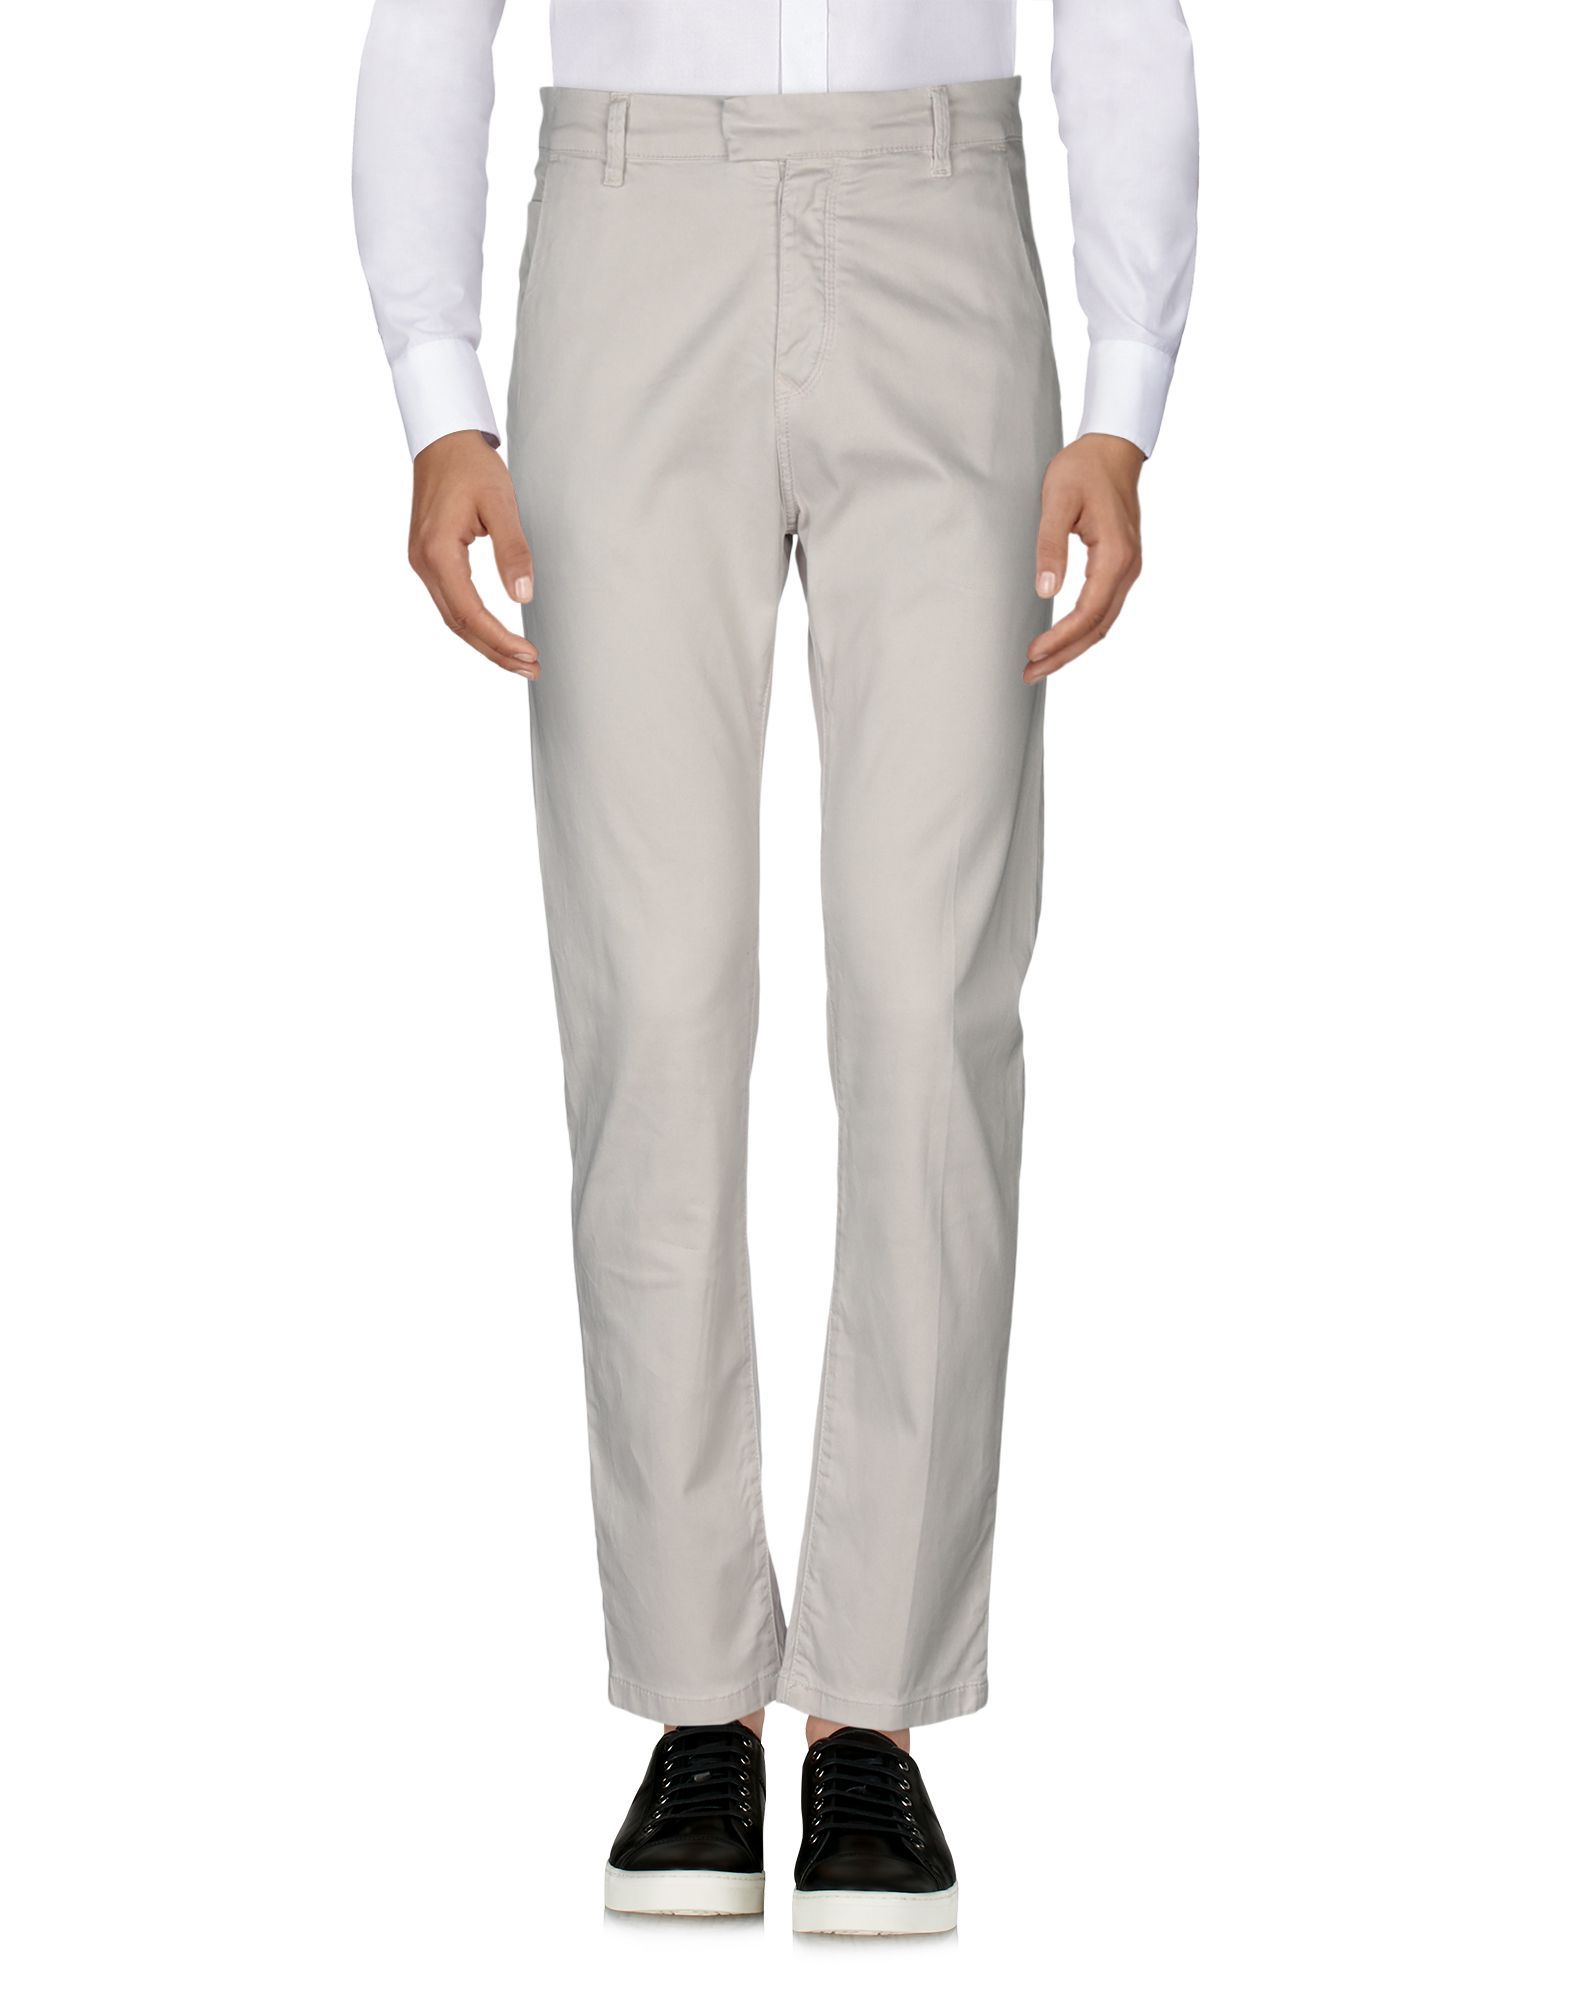 plain weave, logo, solid colour, high waisted, regular fit, tapered leg, button, zip, multipockets, pants